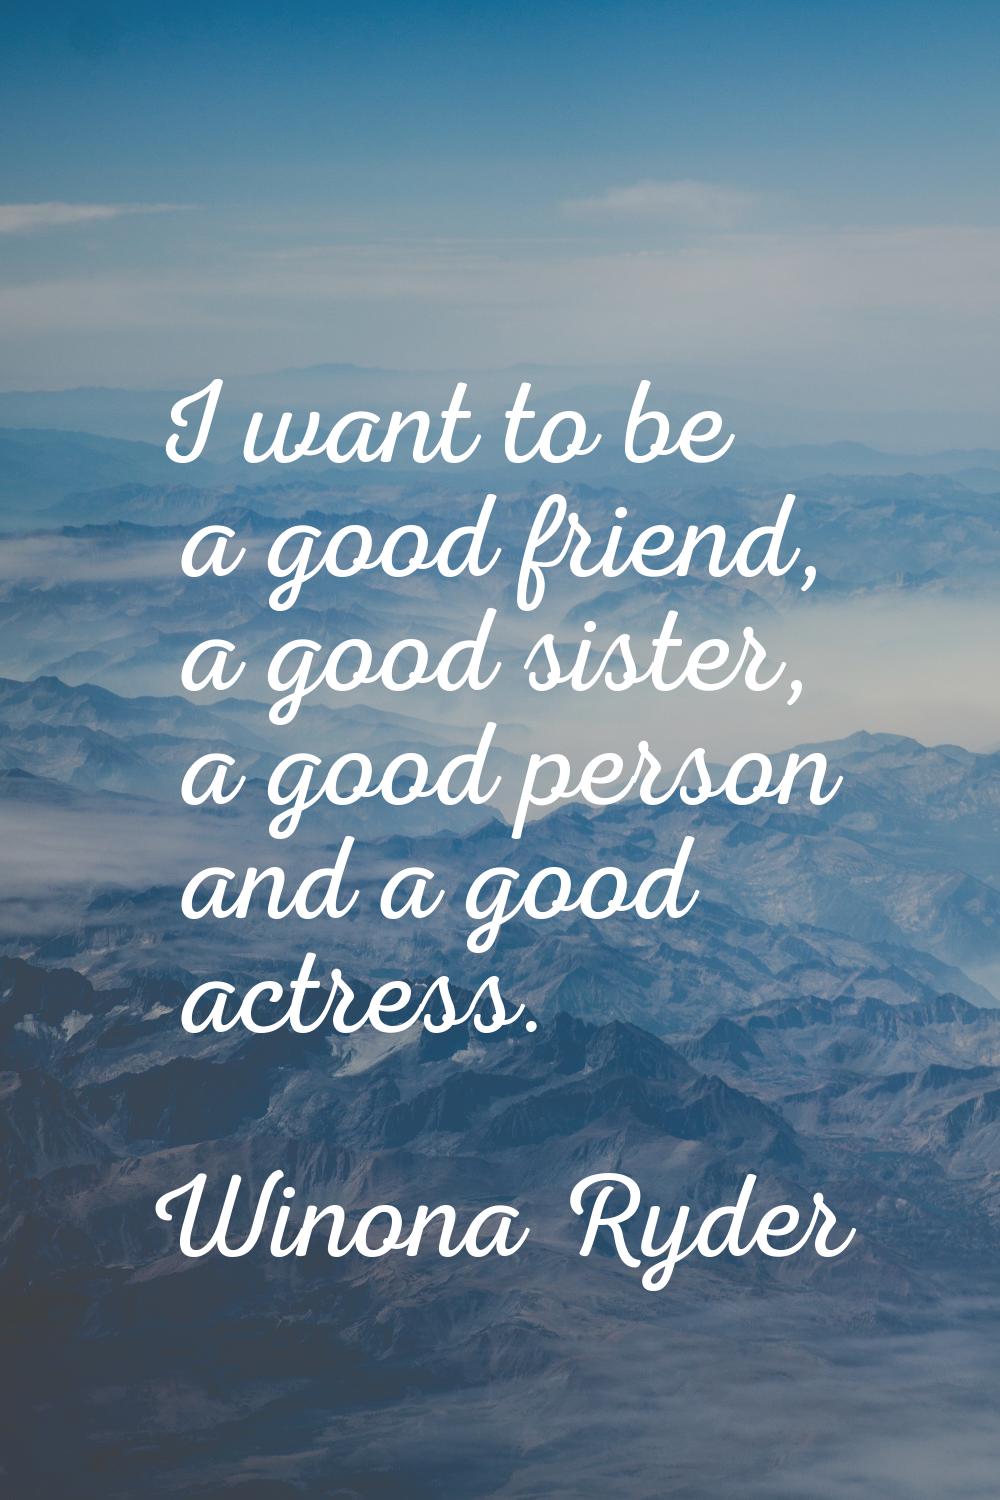 I want to be a good friend, a good sister, a good person and a good actress.